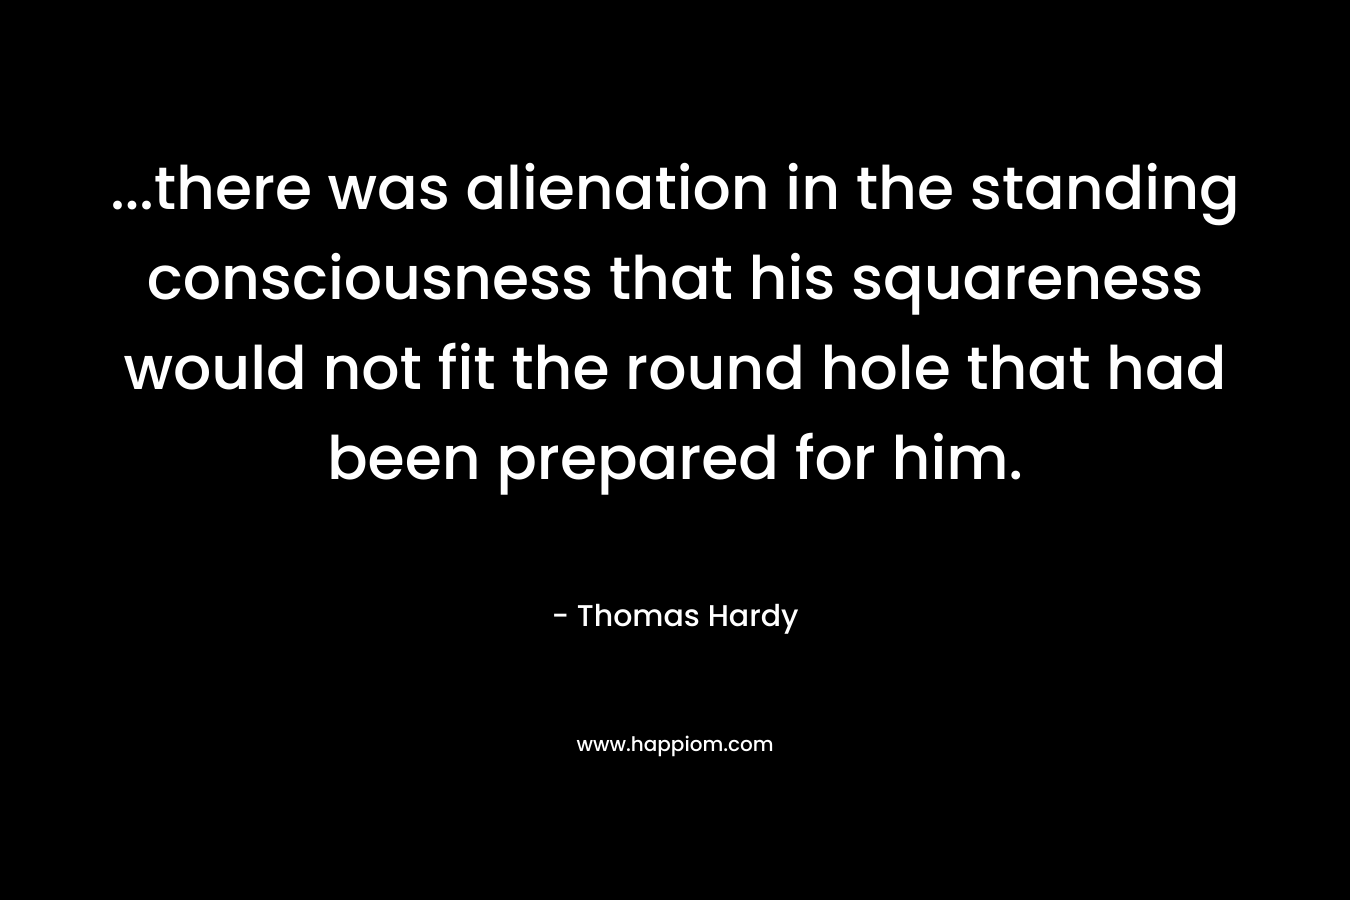 …there was alienation in the standing consciousness that his squareness would not fit the round hole that had been prepared for him. – Thomas Hardy